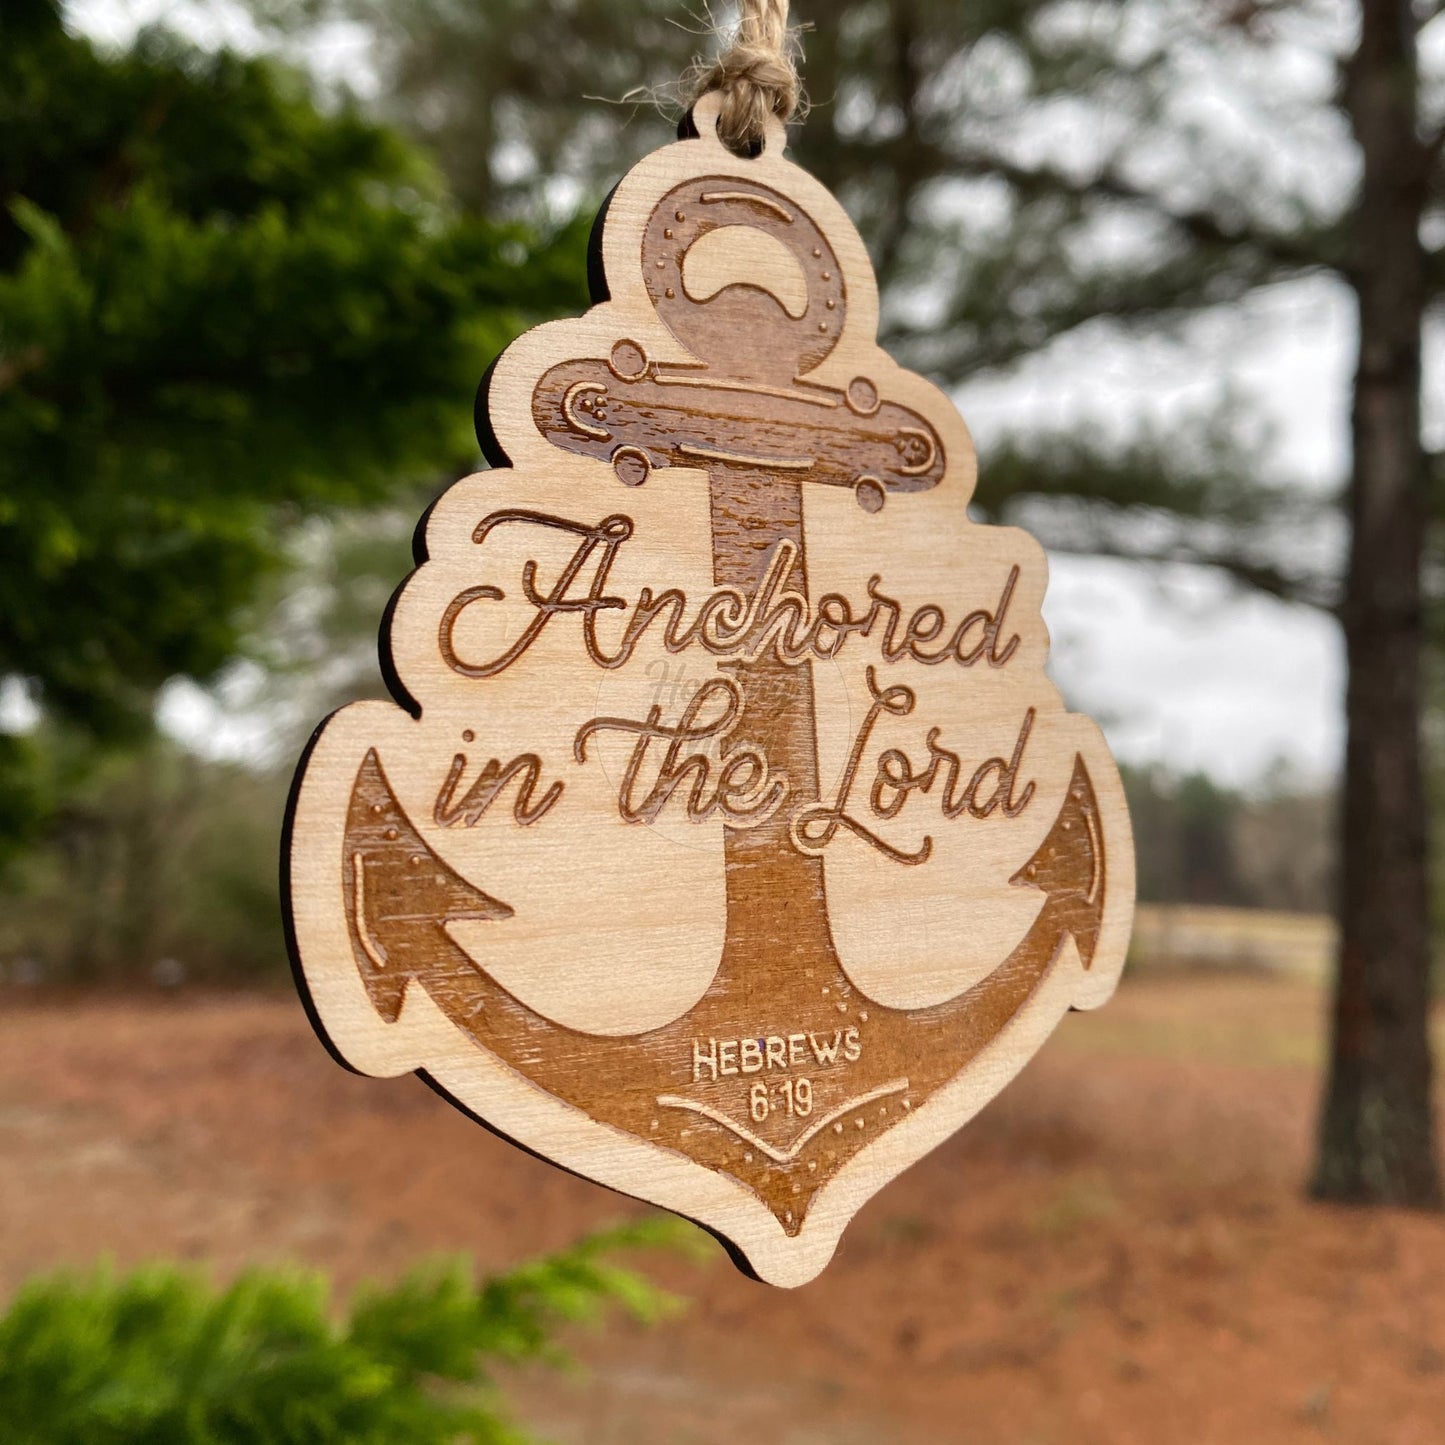 Anchored in the Lord Nautical Ornament, featuring verse Hebrews 6:19 is handcrafted in Virginia USA by Howling Moon Laser Design Studio